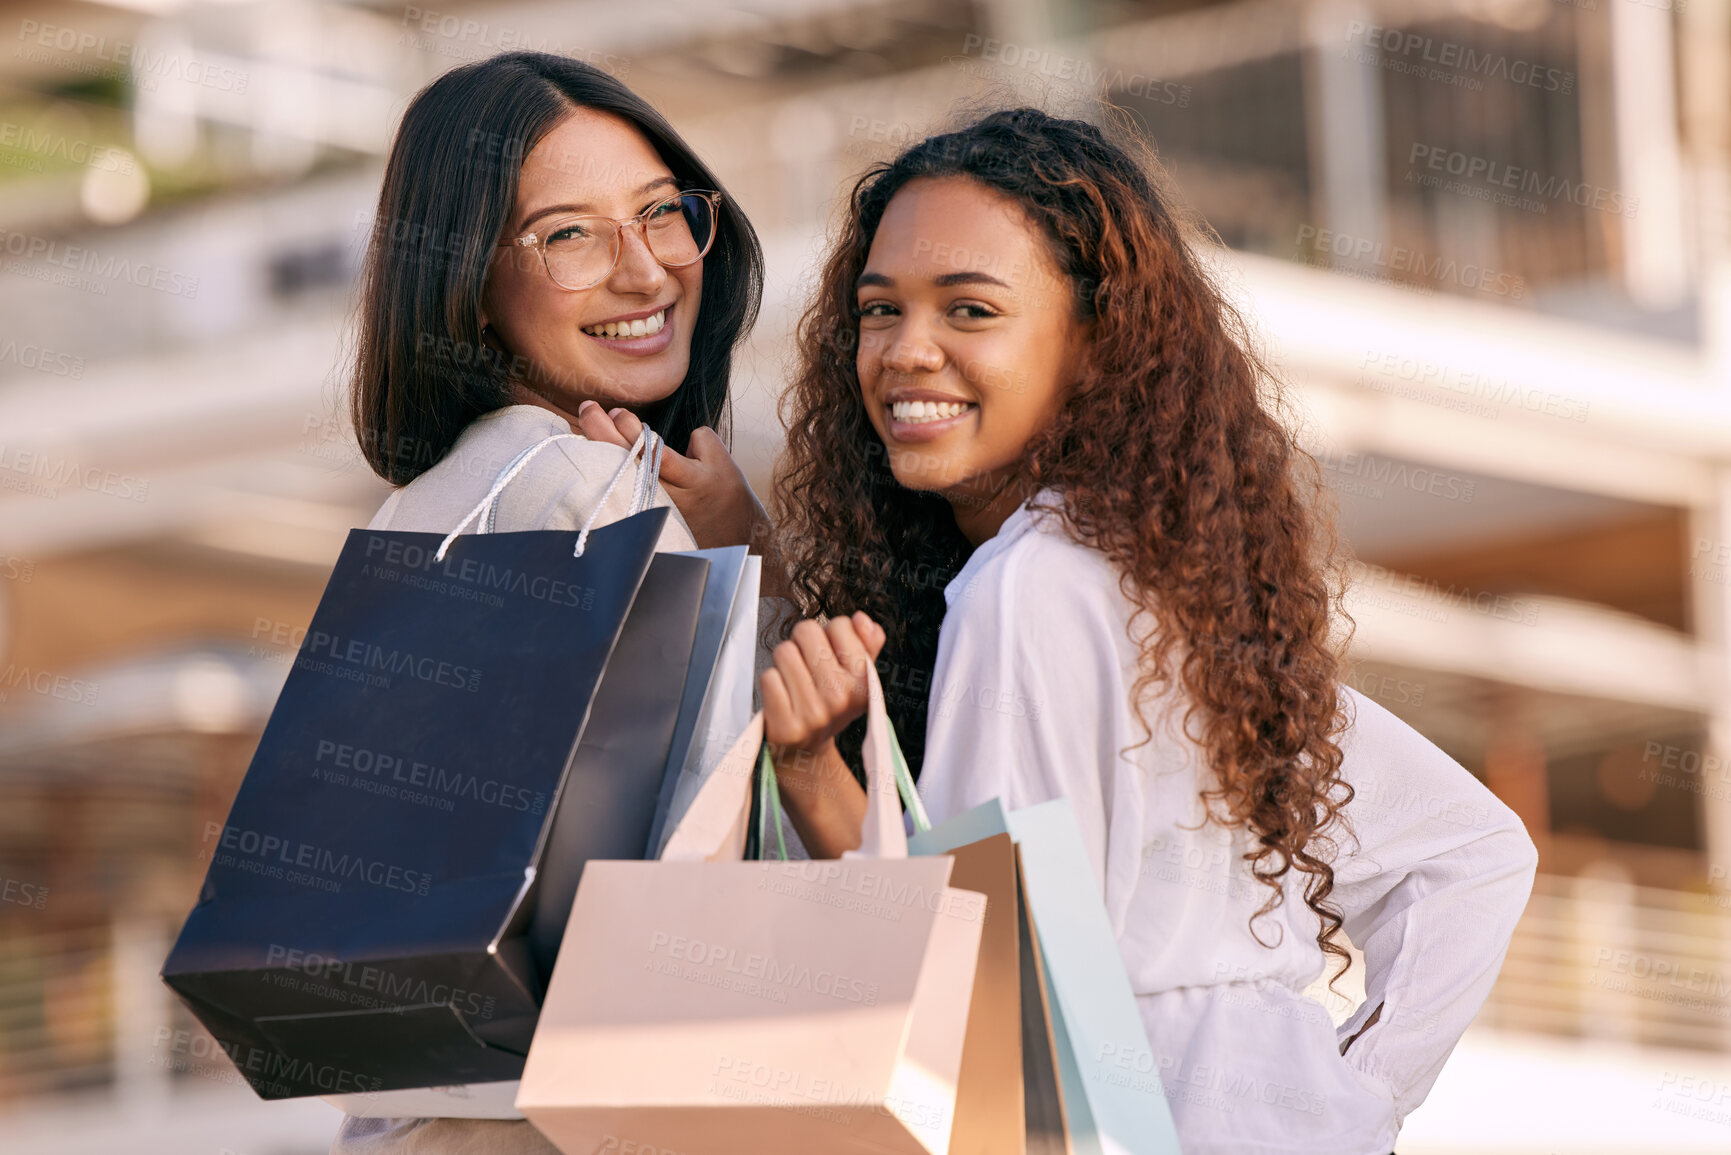 Buy stock photo Shot of two attractive young women standing outside together and bonding while shopping in the city